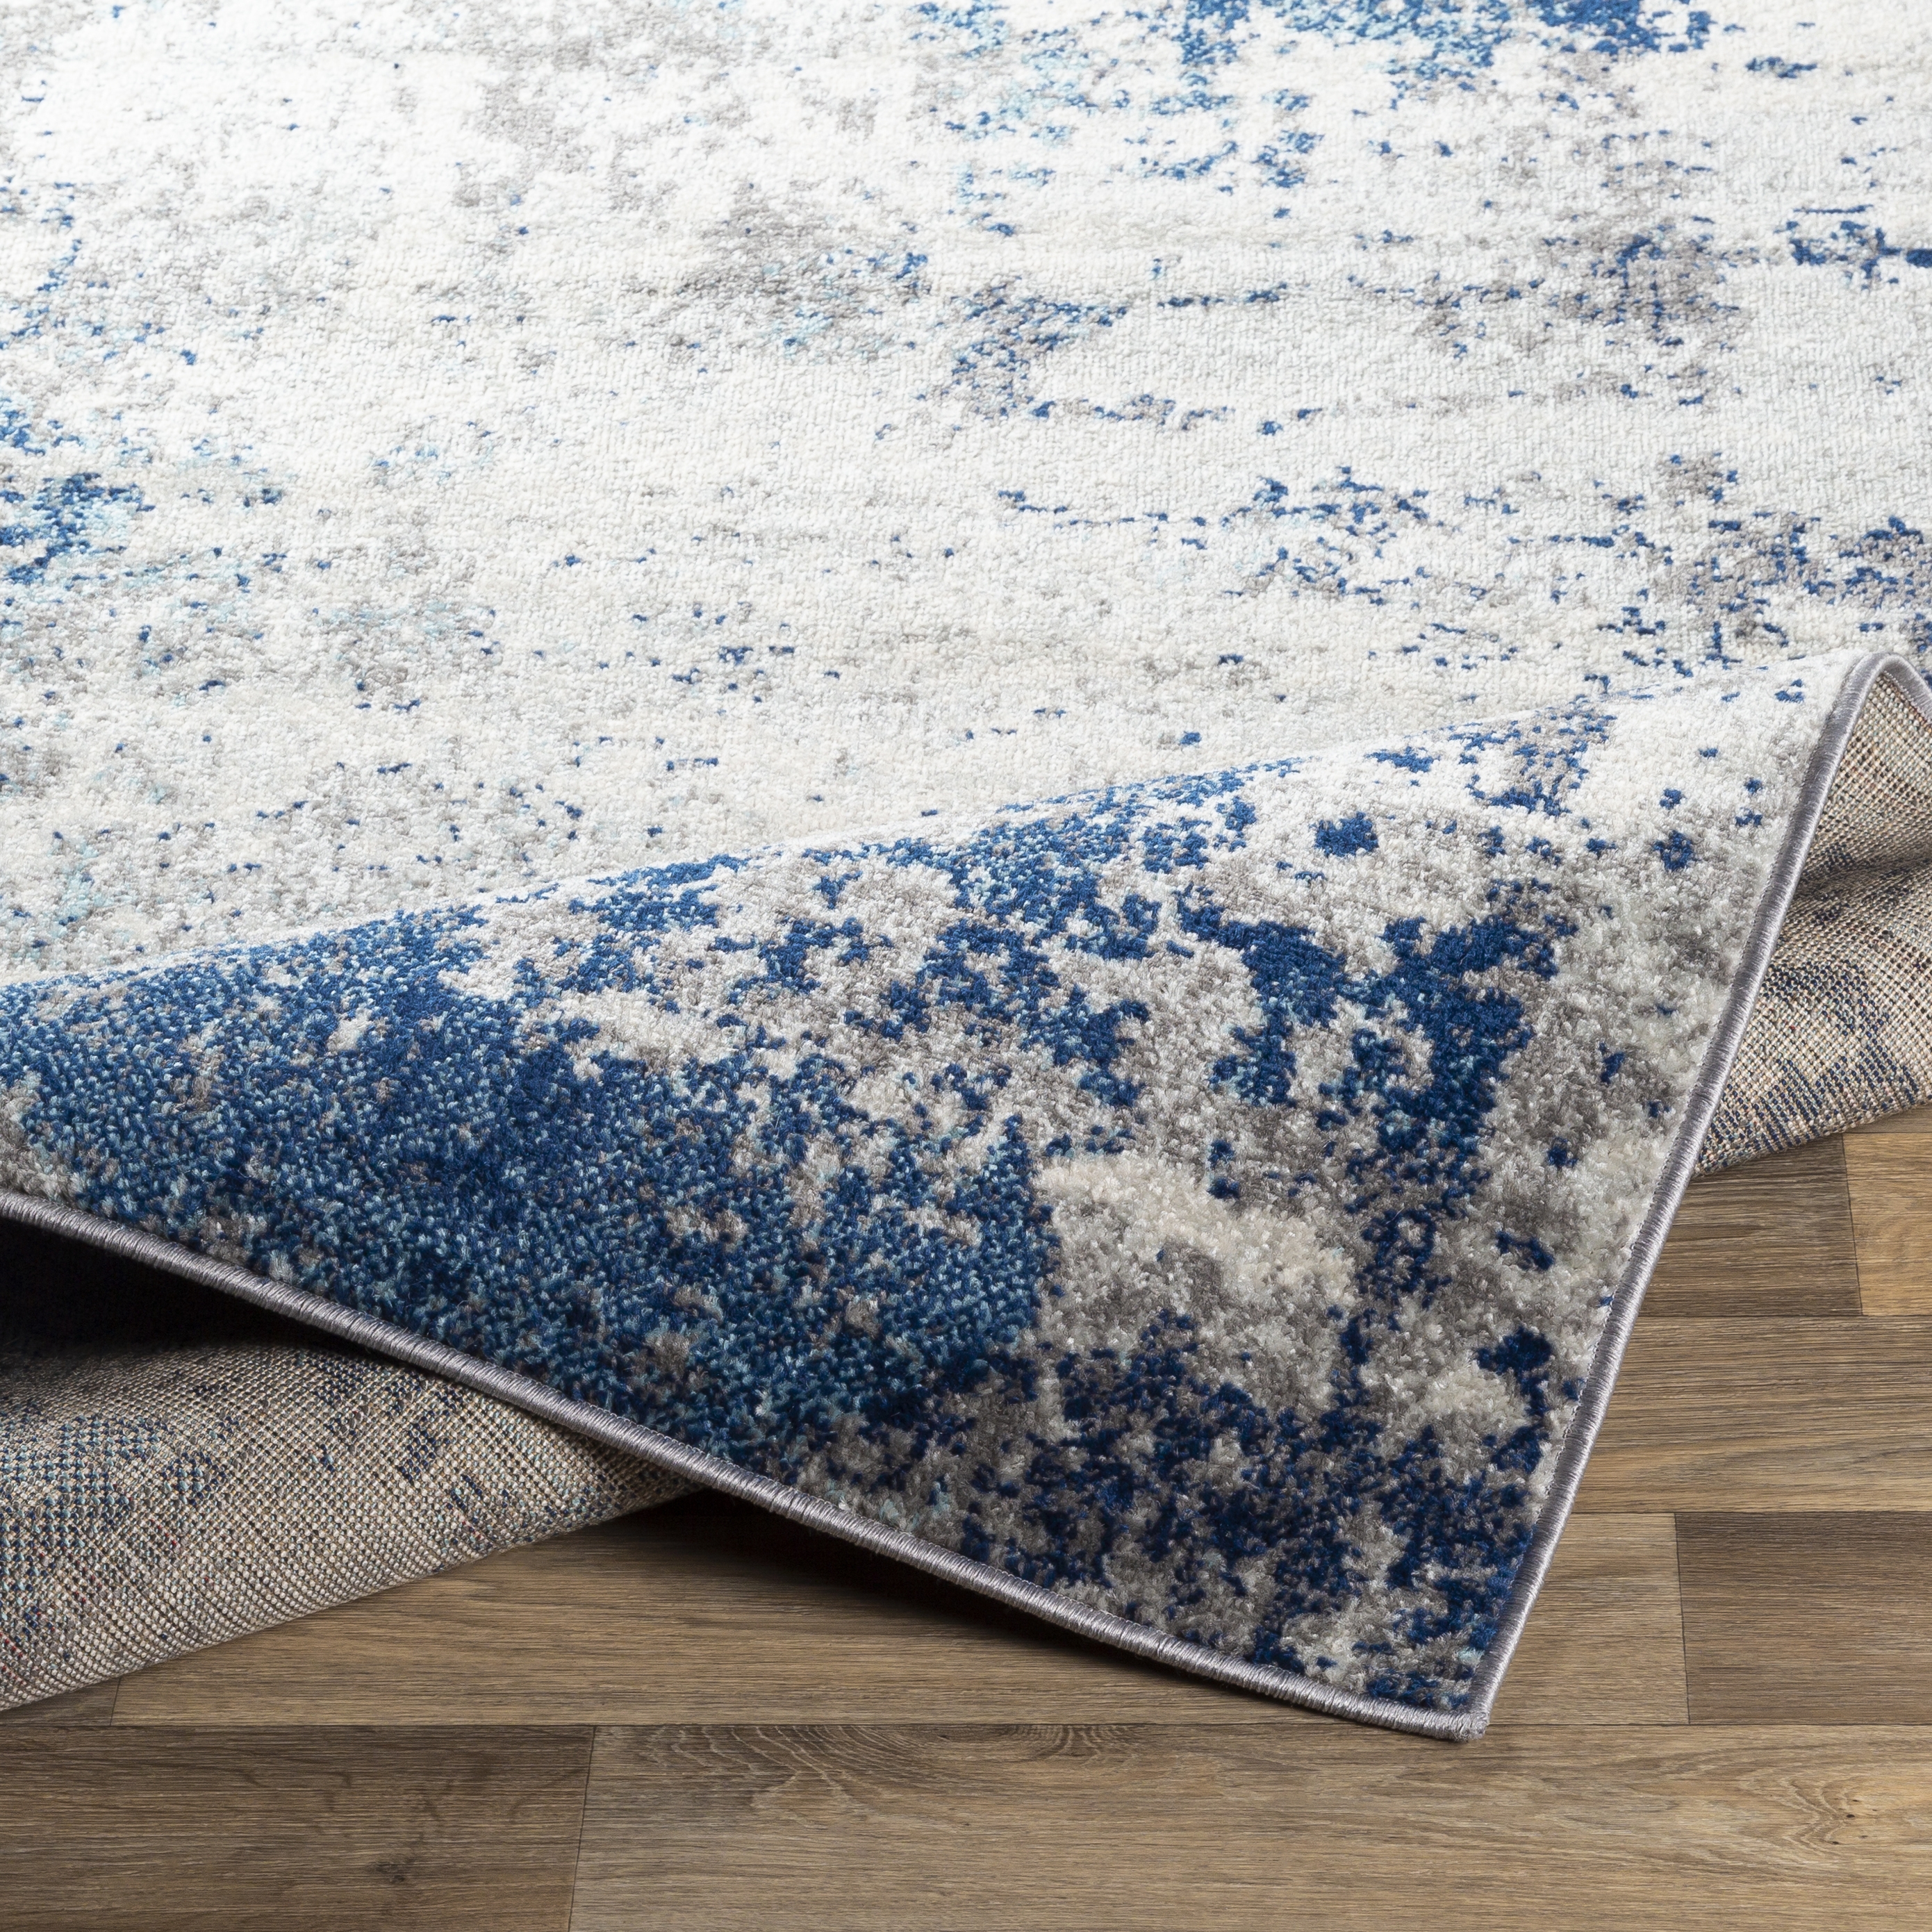 Chester Rug, 7'10" x 10'3" - Image 4